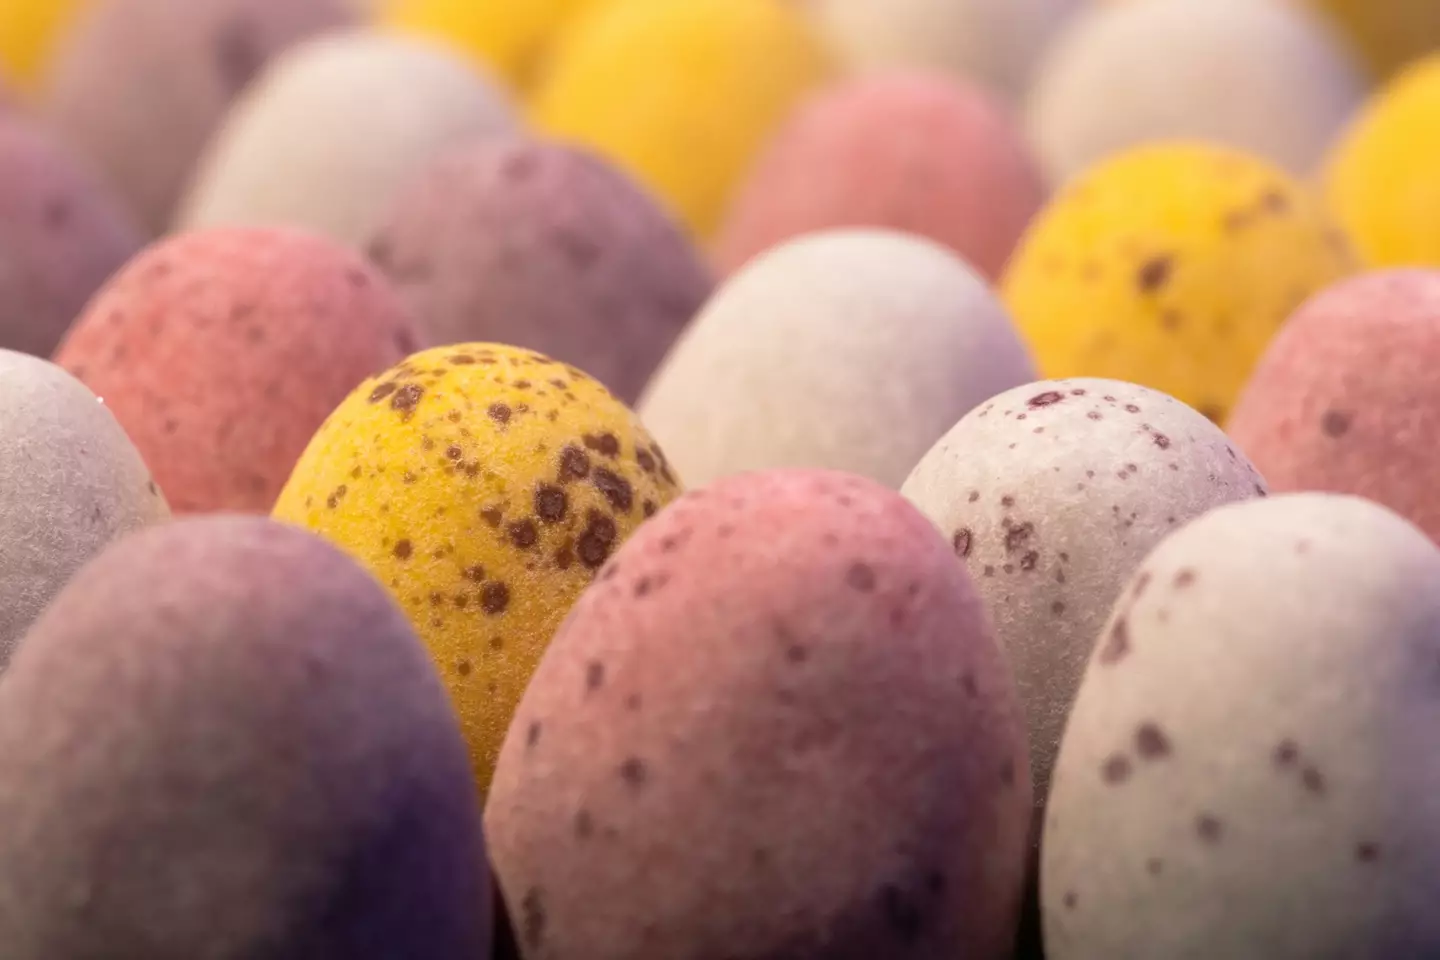 A warning has been issued over Mini Eggs ahead of the Easter holidays.